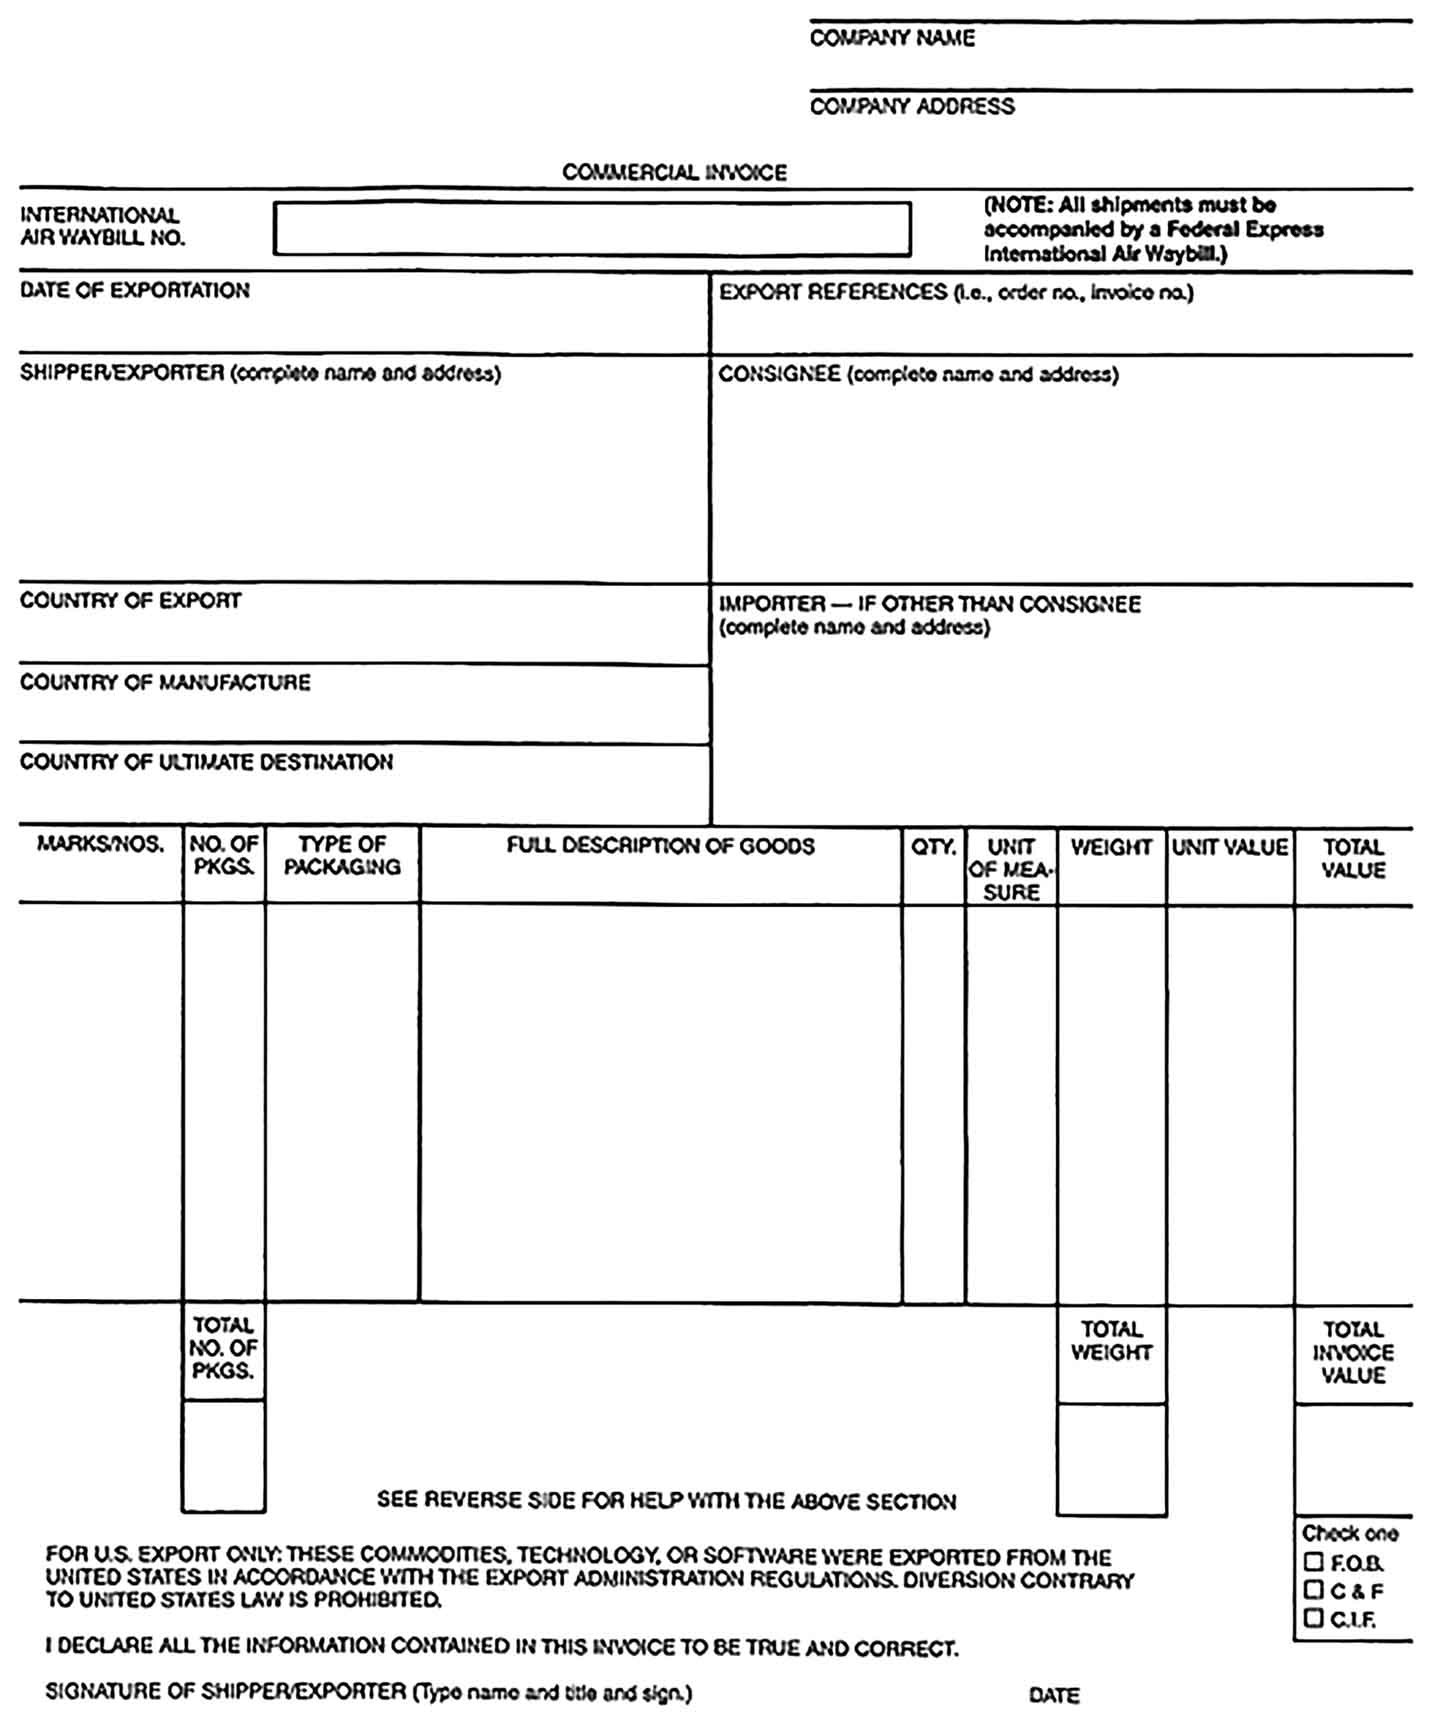 Sample Commercial Invoice Receipt Templates